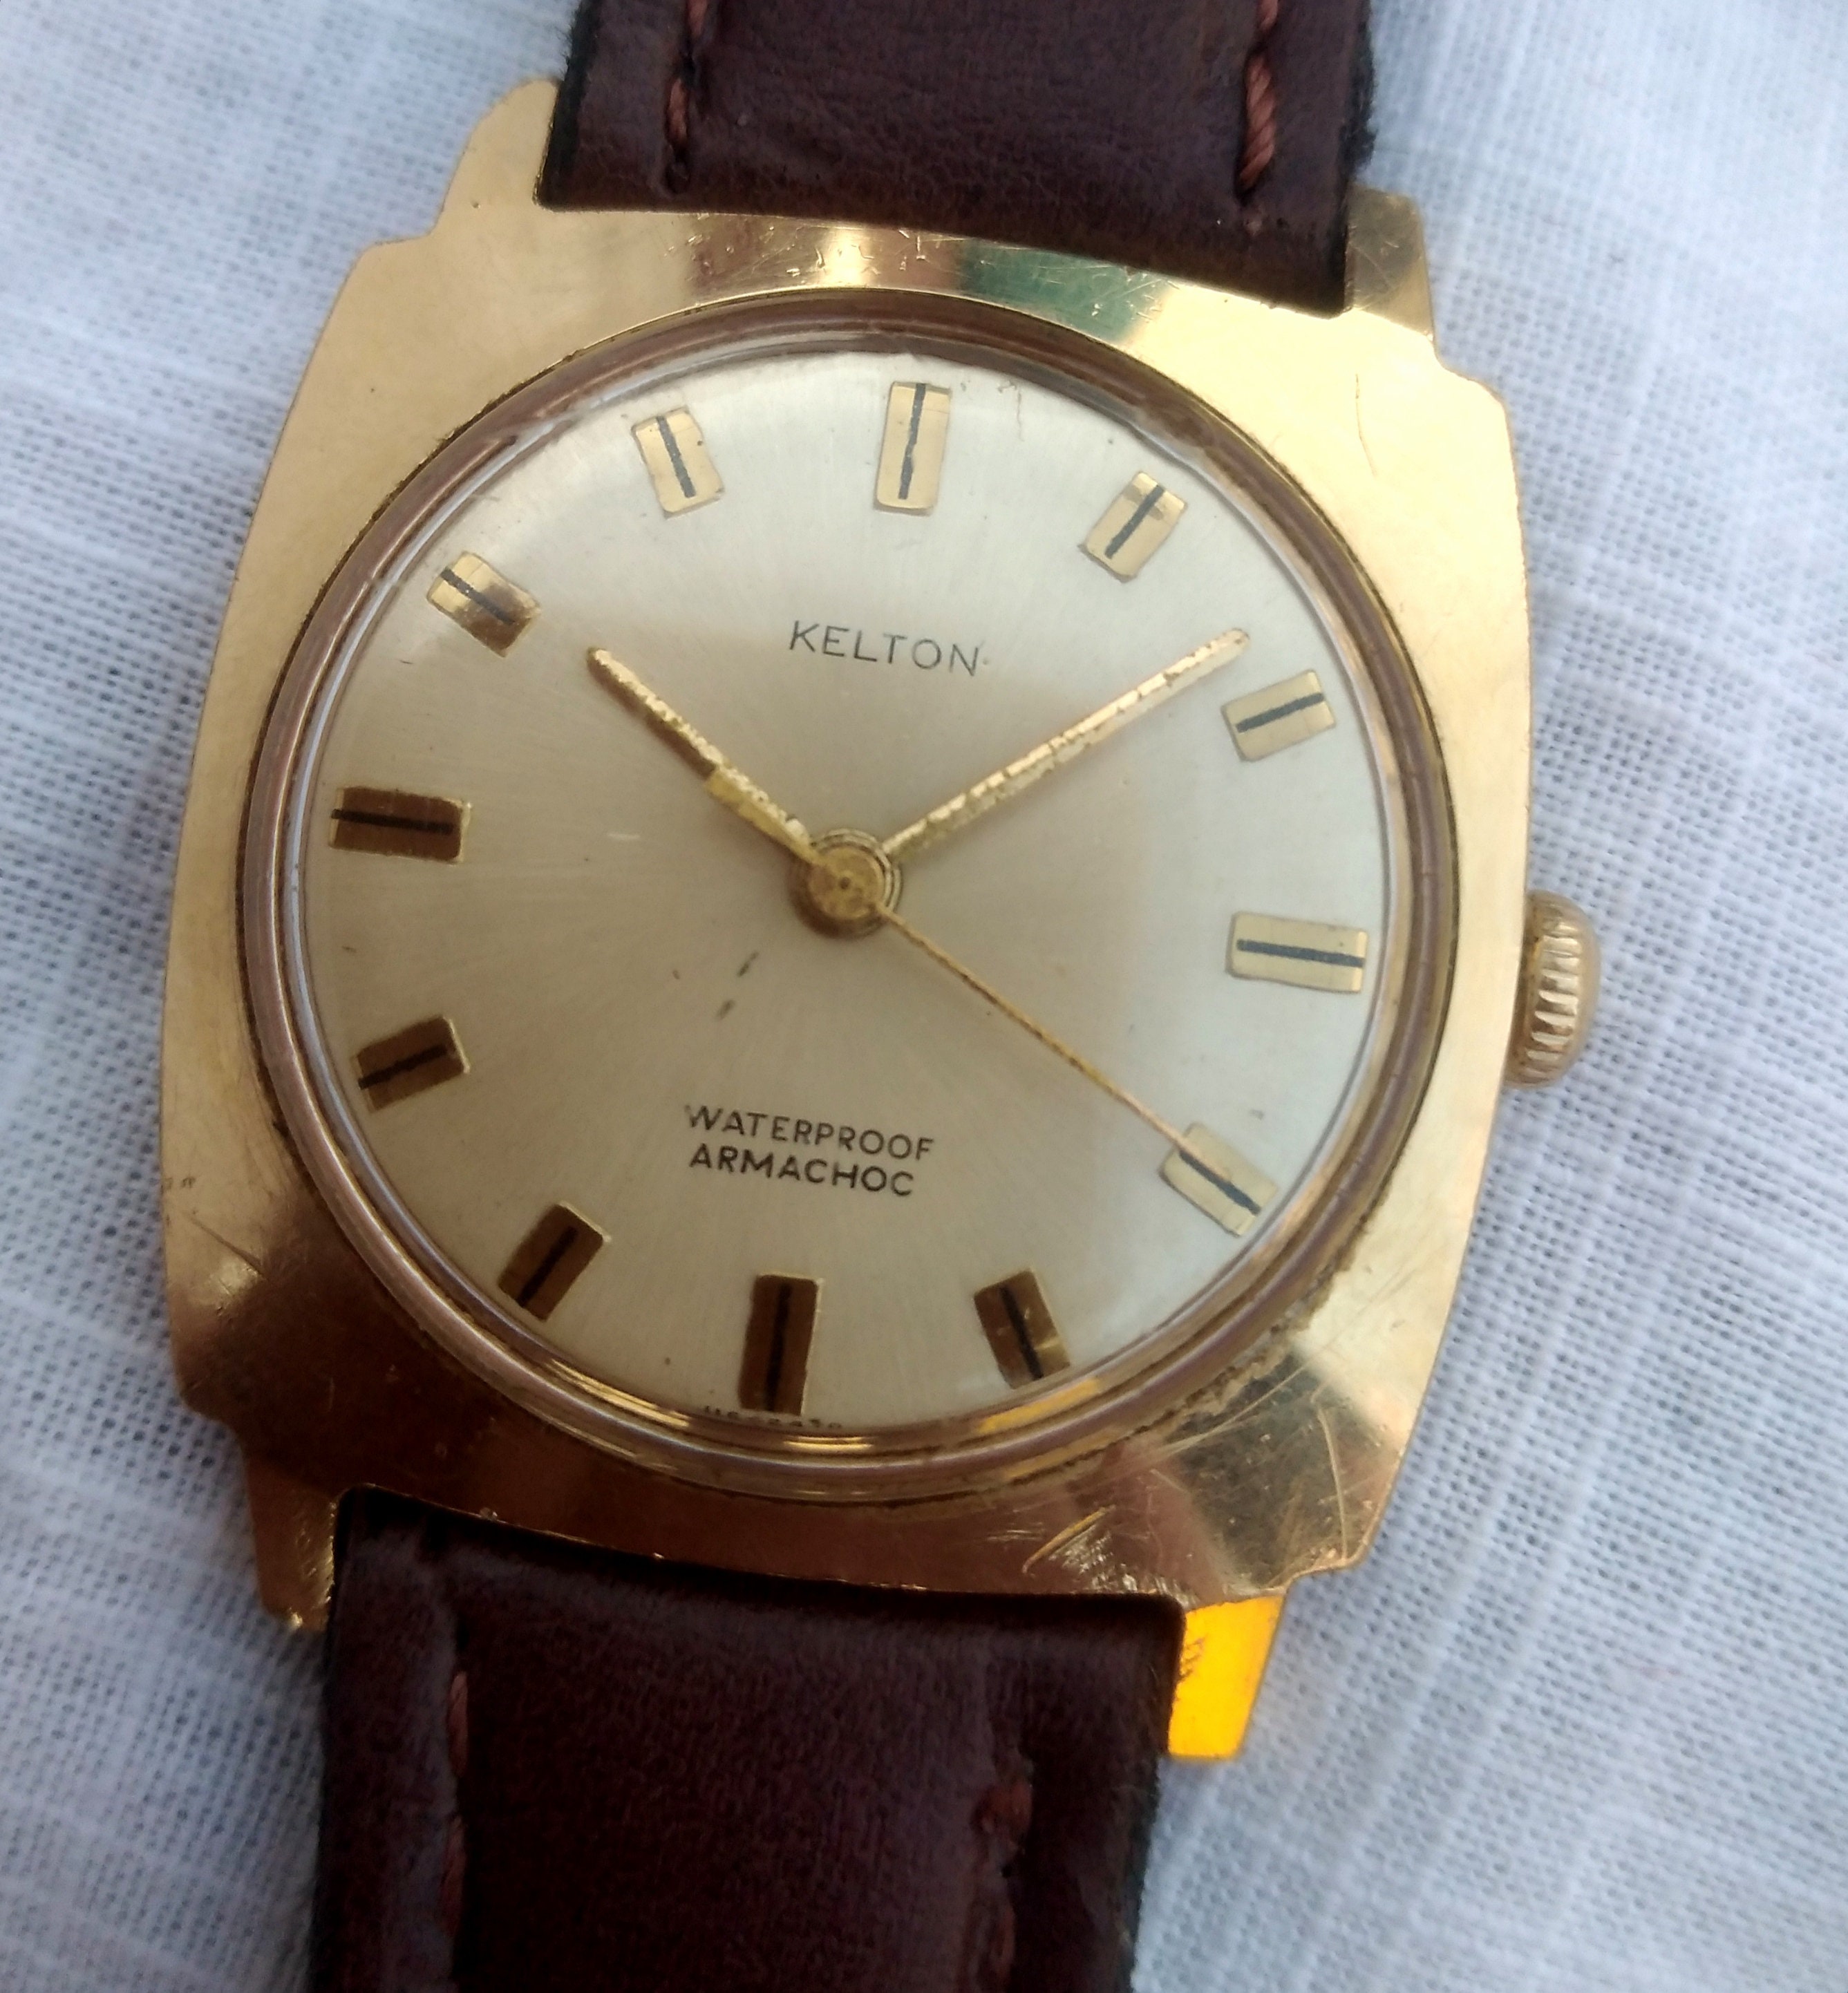 Kelton Watch for sale | Only 3 left at -60%